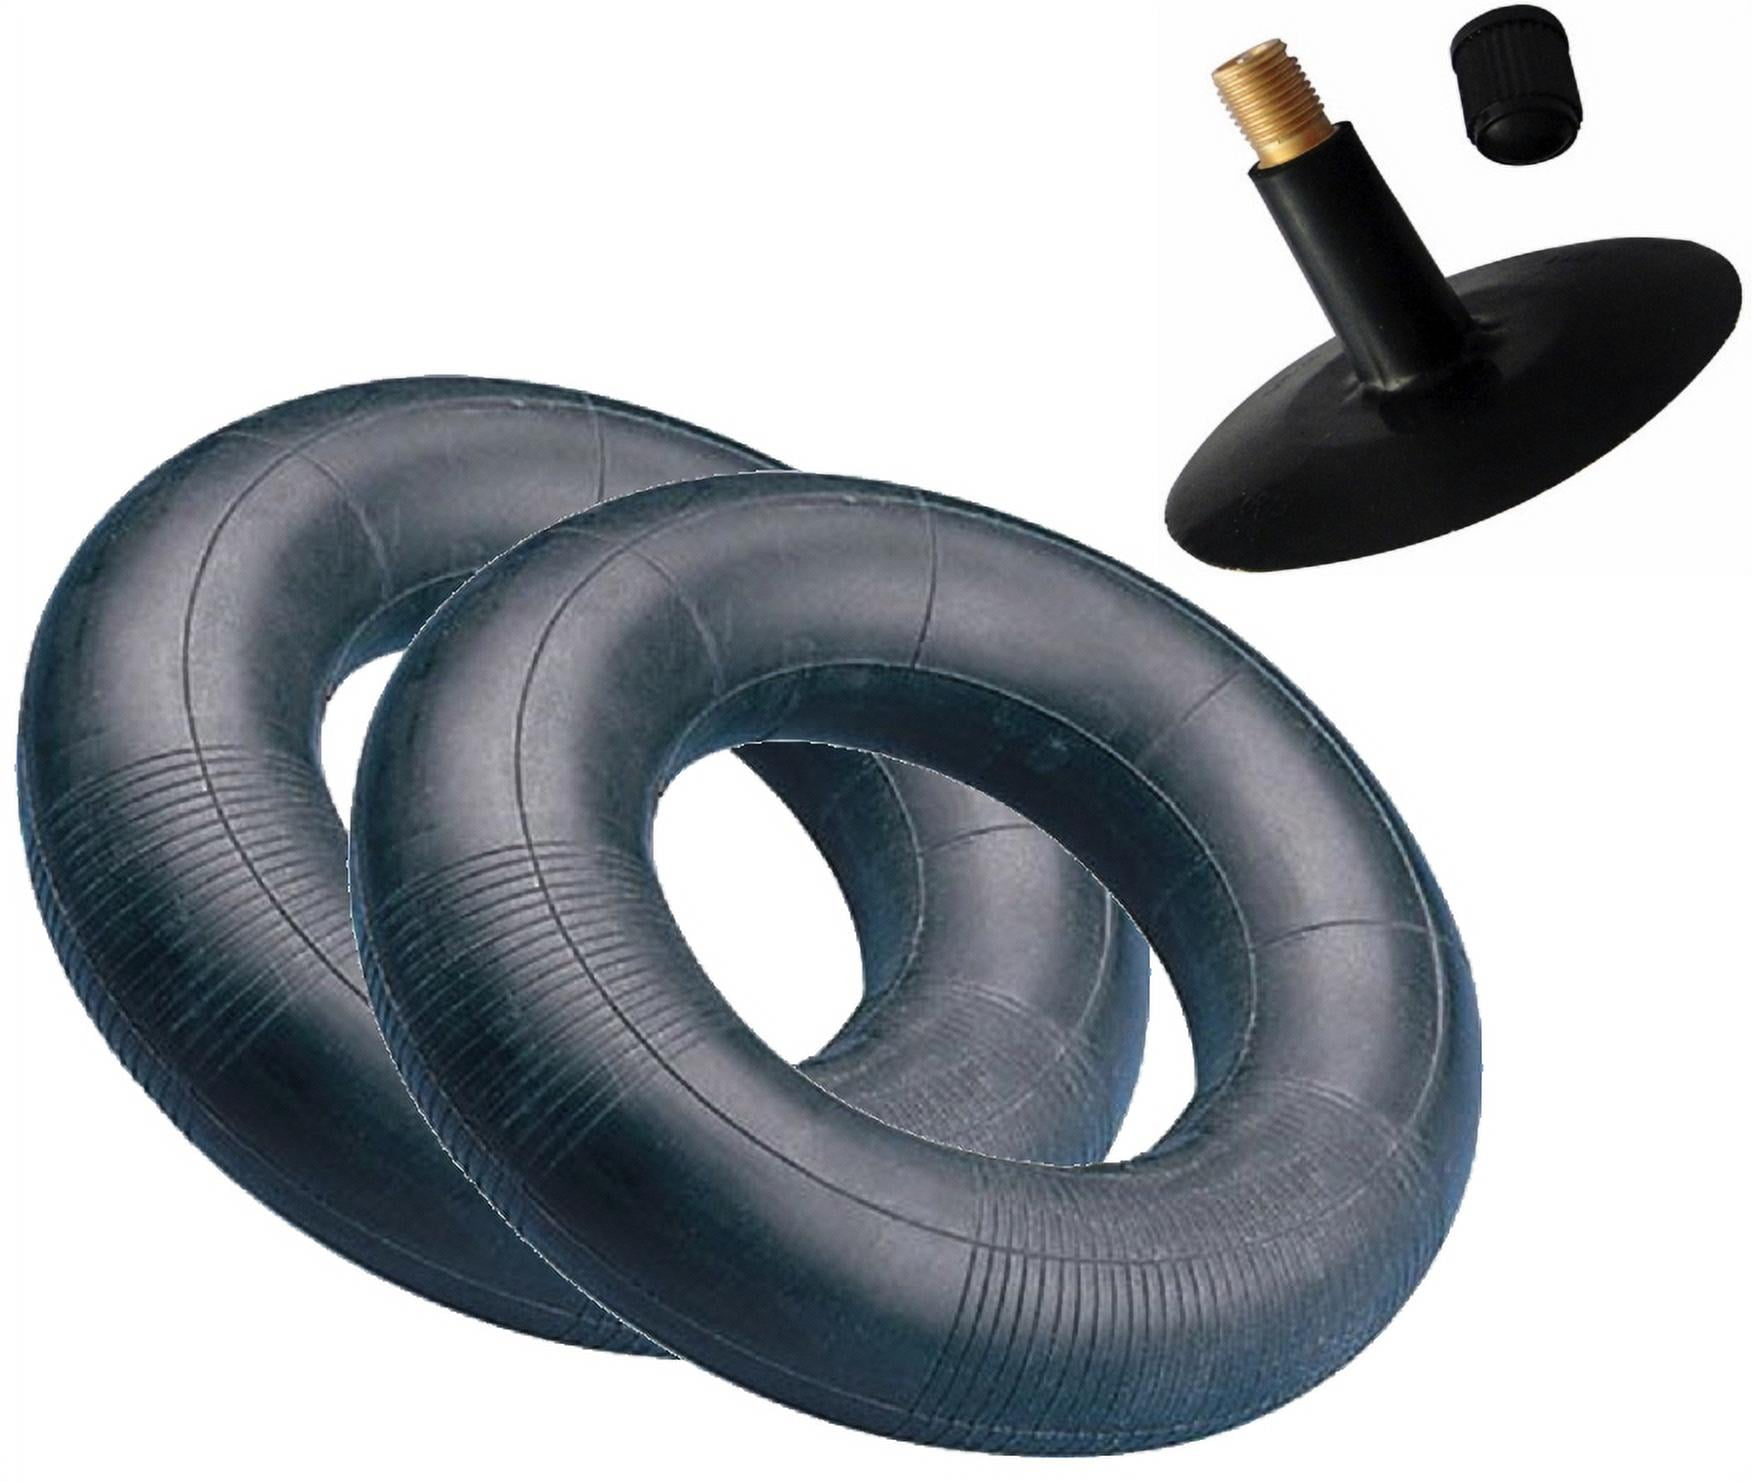 TWO New 15X6.00-6 Tire Inner Tubes  with TR13 stem for Lawn Mowers & More 